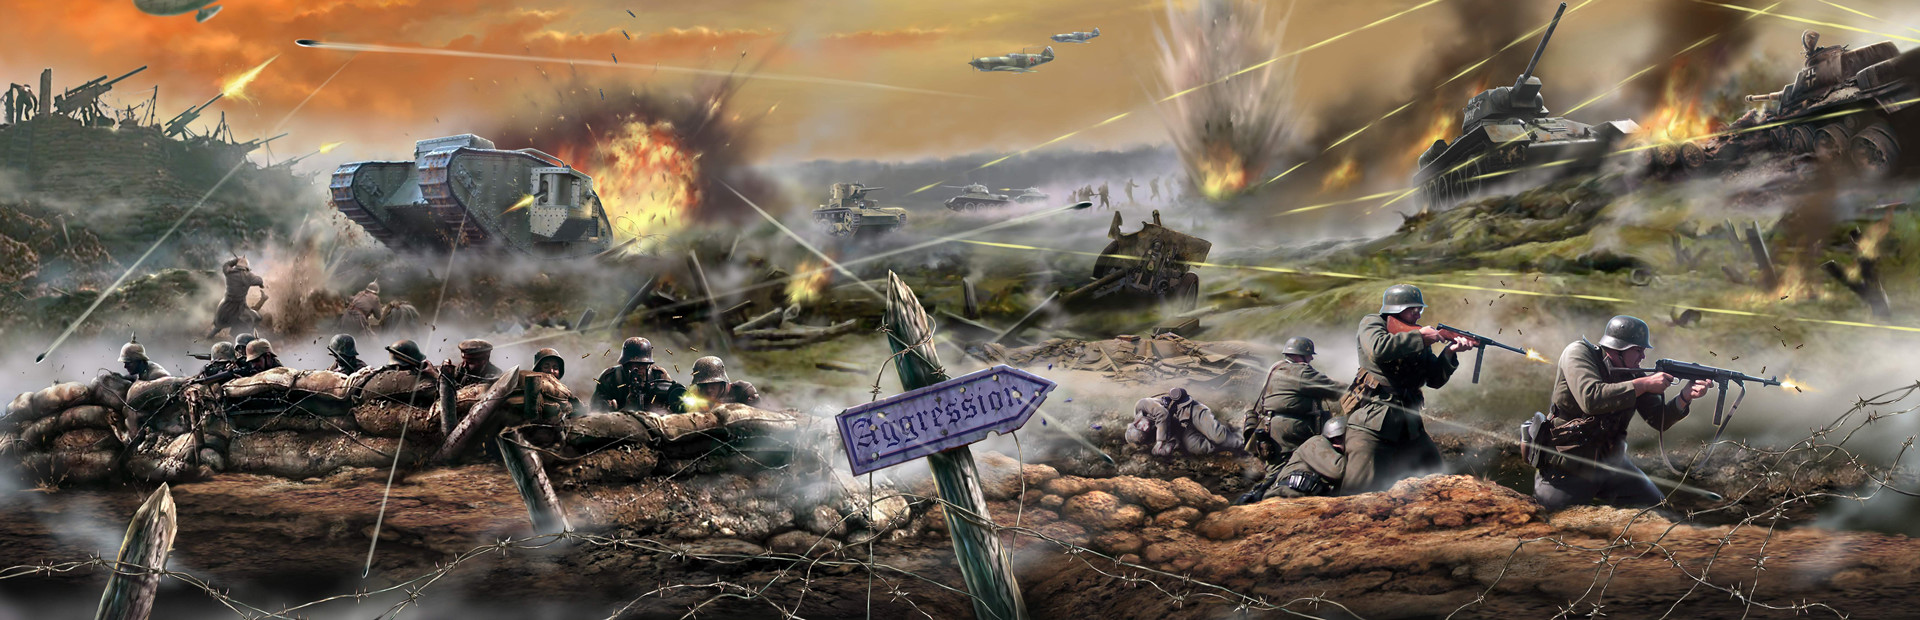 Aggression: Europe Under Fire cover image